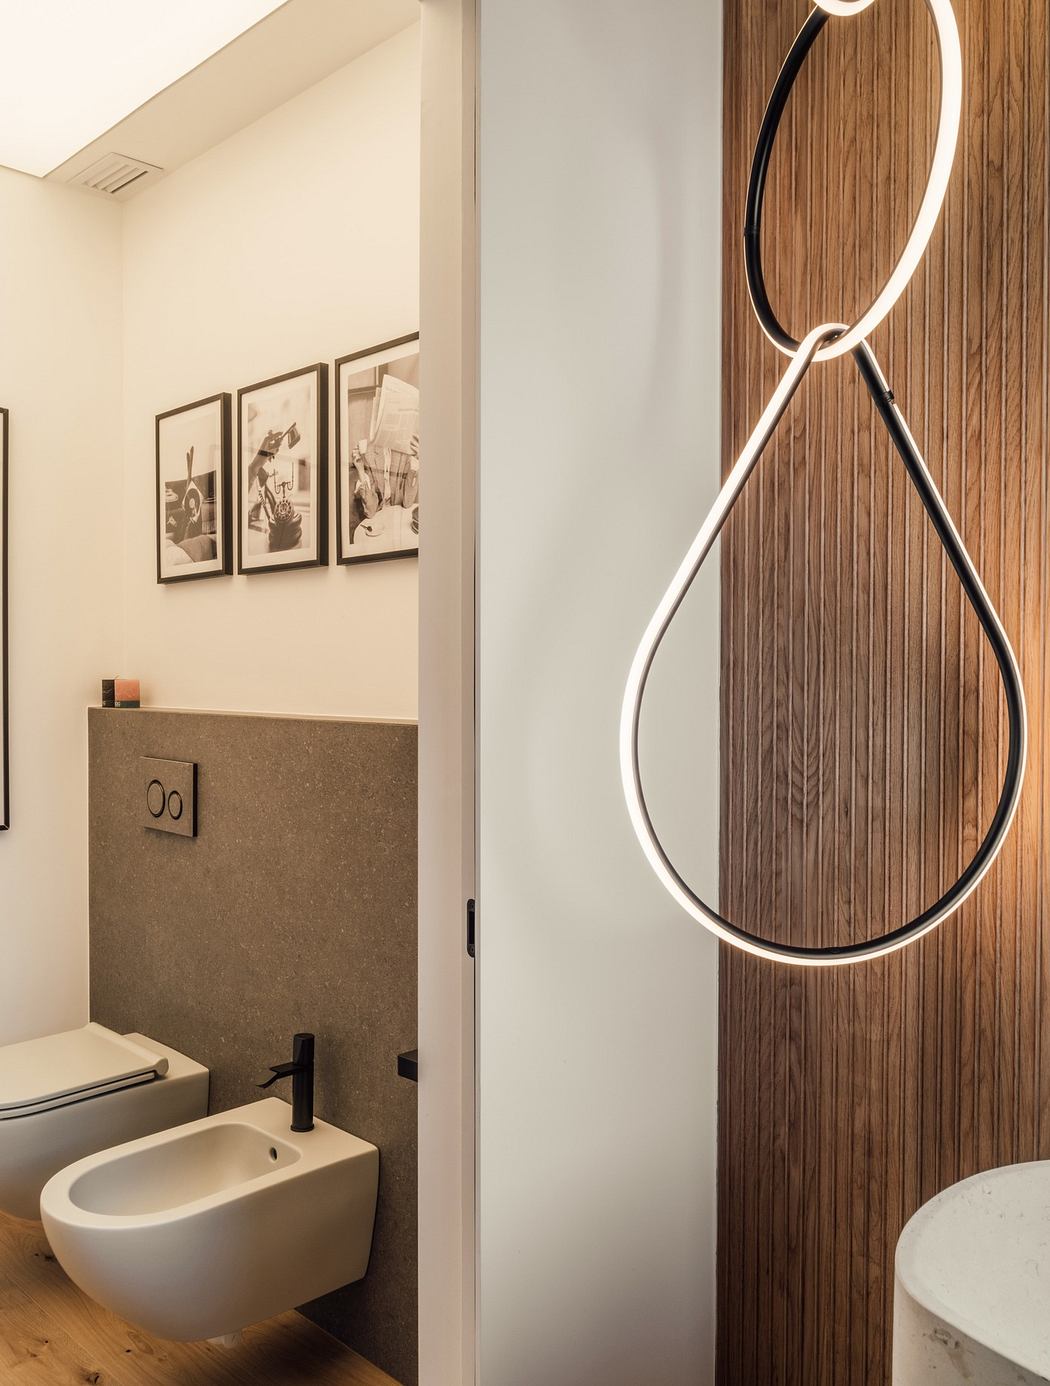 Modern bathroom with unique lighting, wooden accents, and minimalist fixtures.